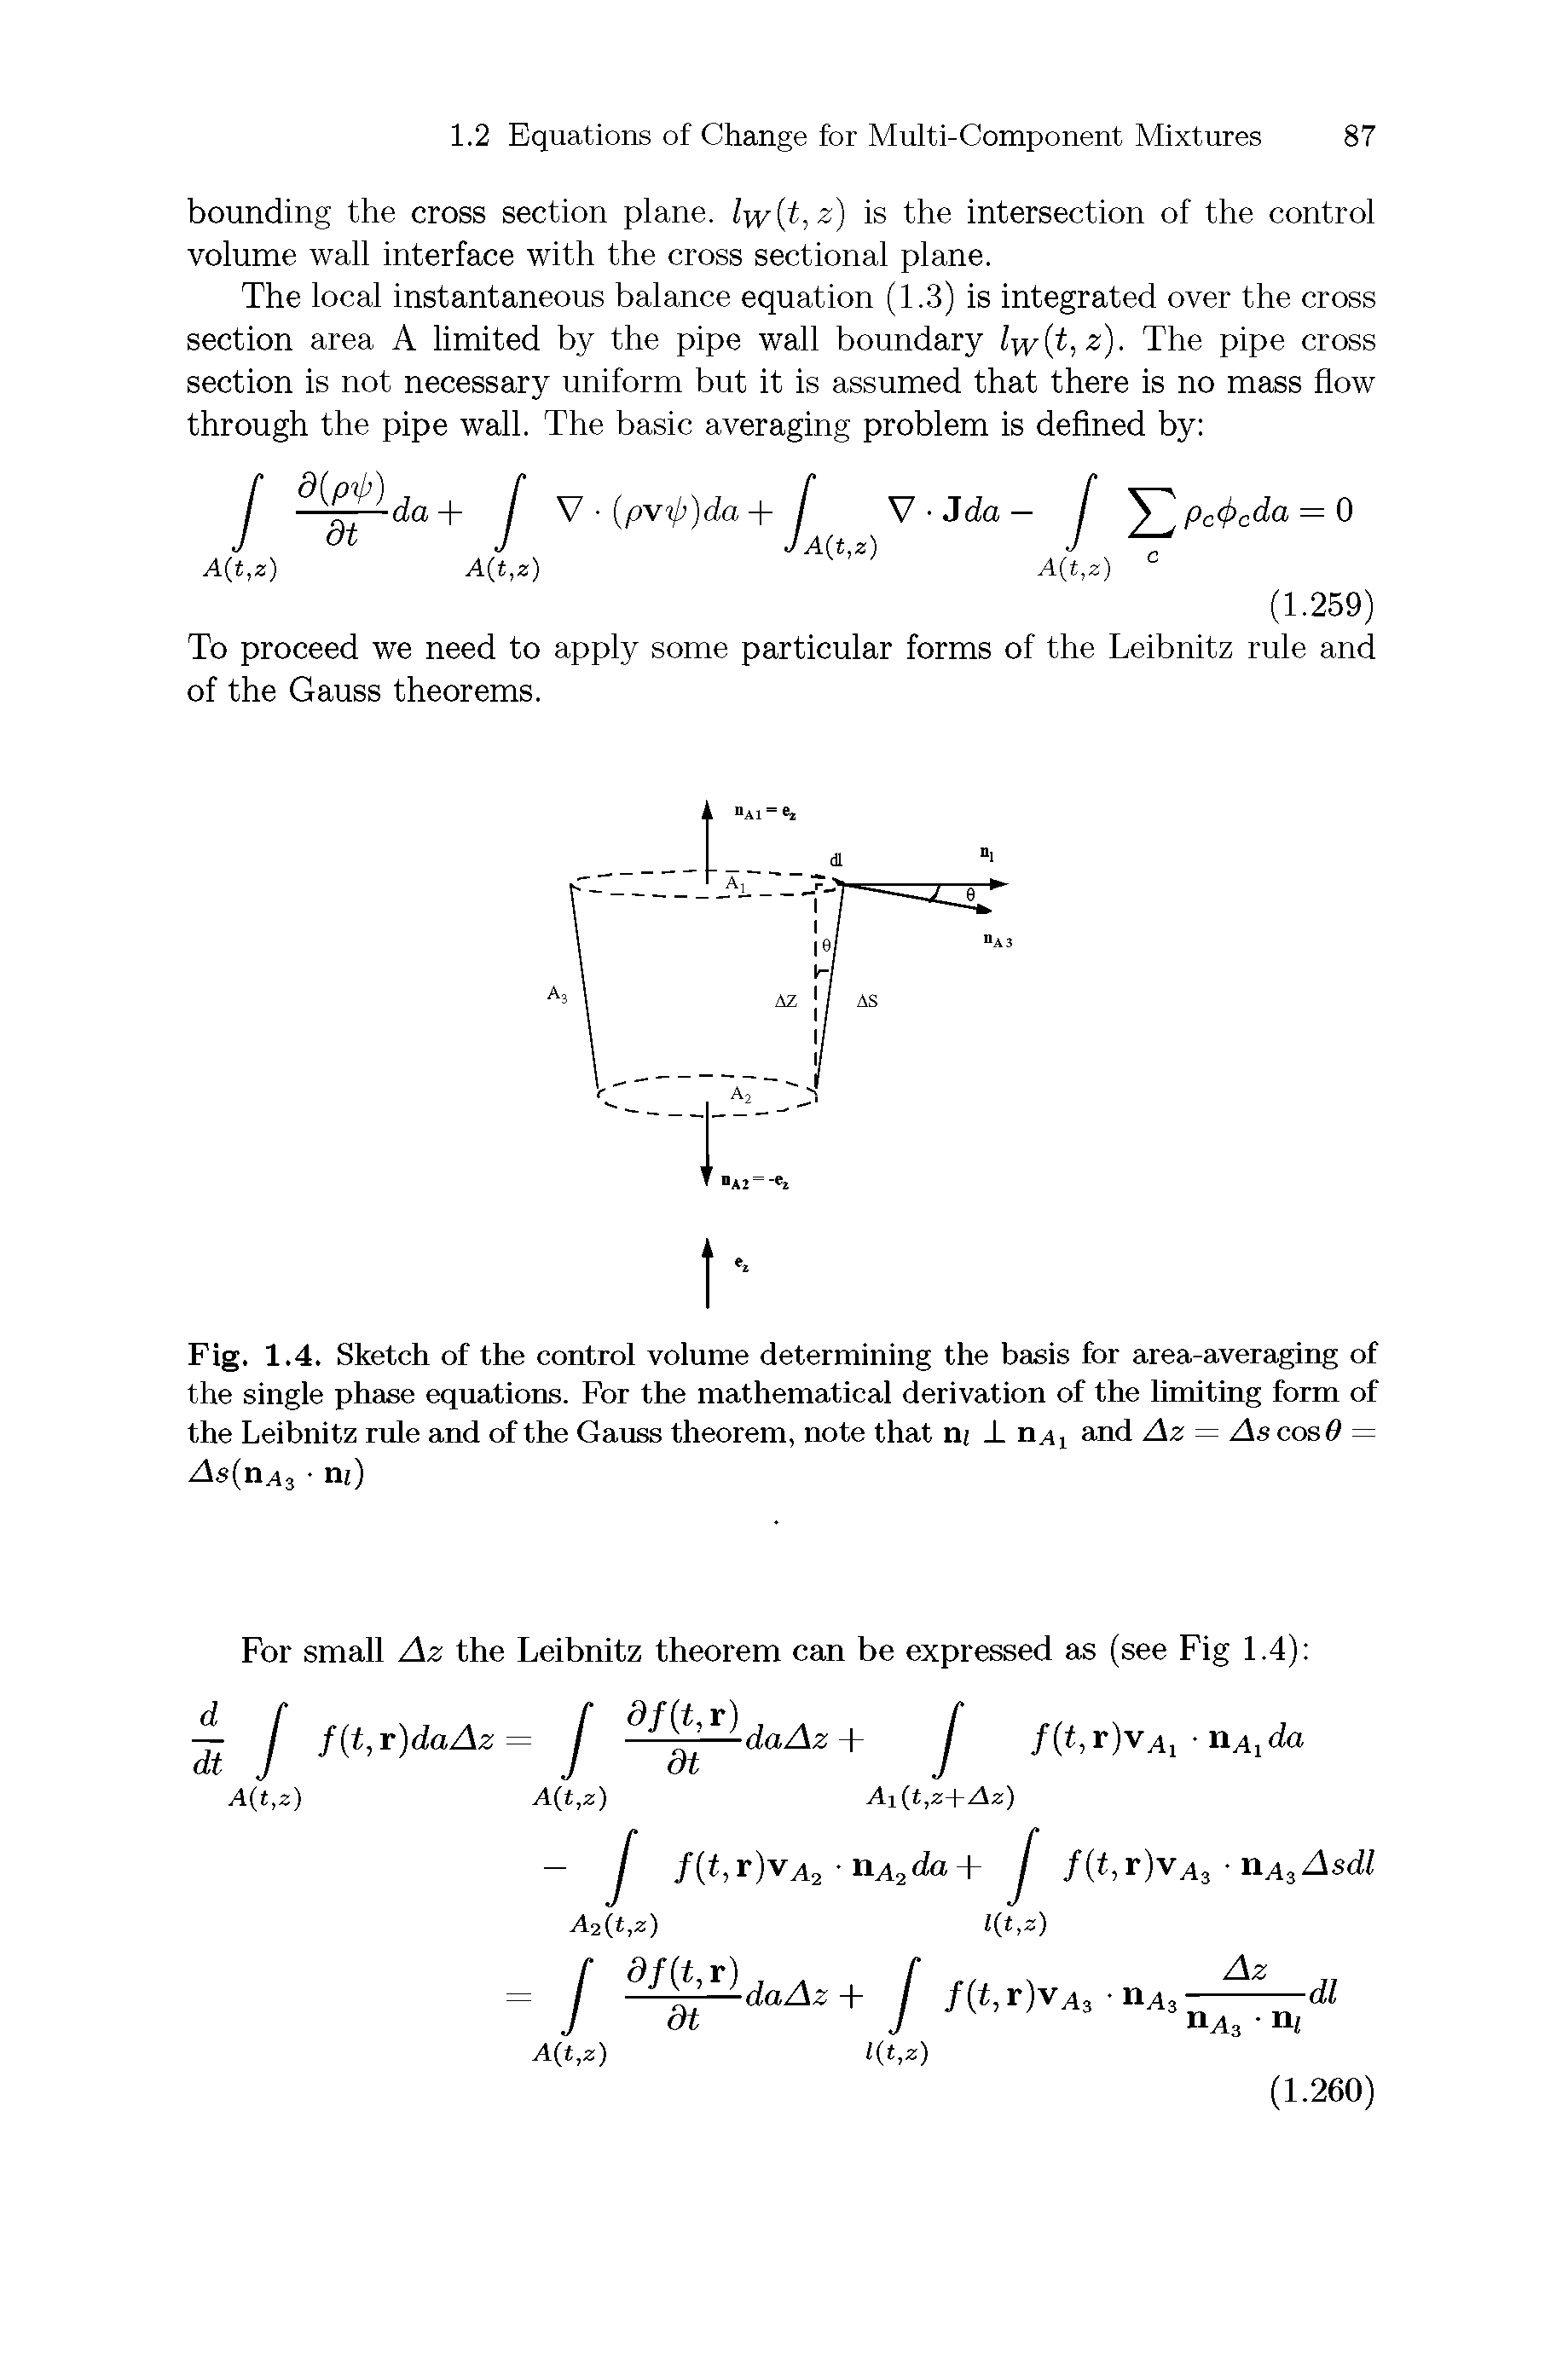 Fig. 1.4. Sketch of the control volume determining the basis for area-averaging of the single phase equations. For the mathematical derivation of the limiting form of the Leibnitz rule and of the Gauss theorem, note that n T n ij and Az = As cos 6 = As(n.43 0...